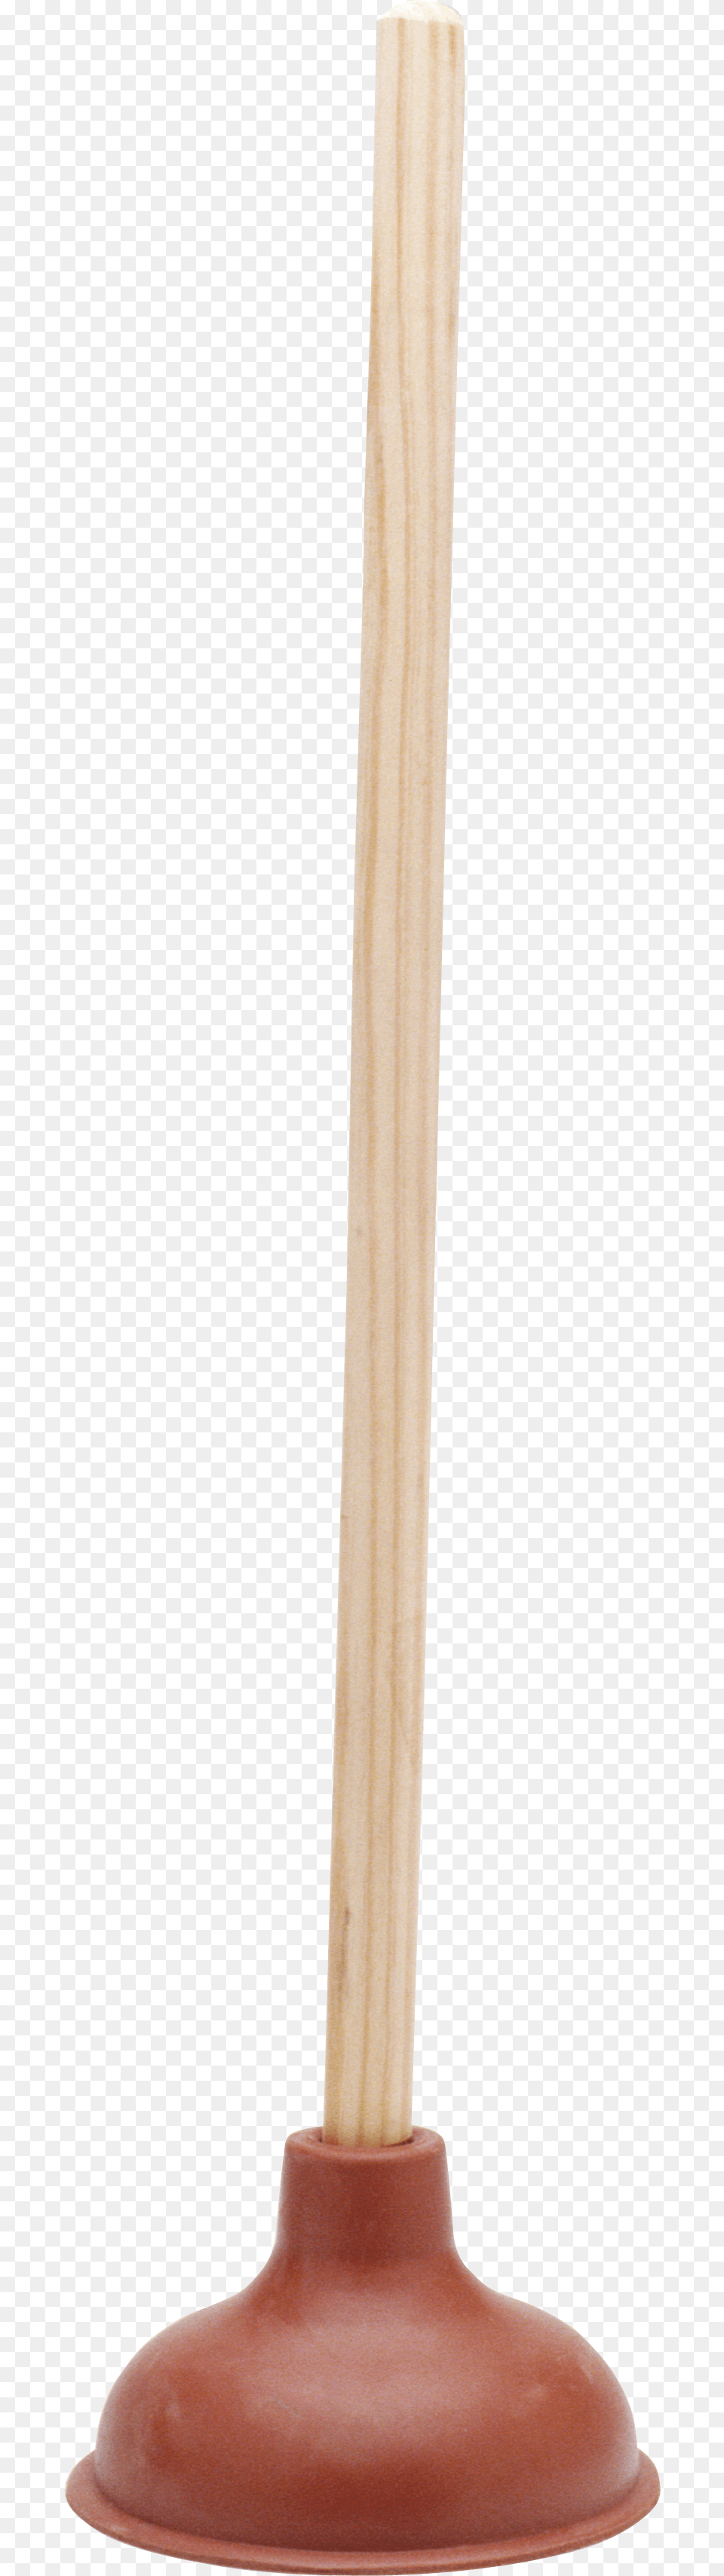 Plunger Png Image